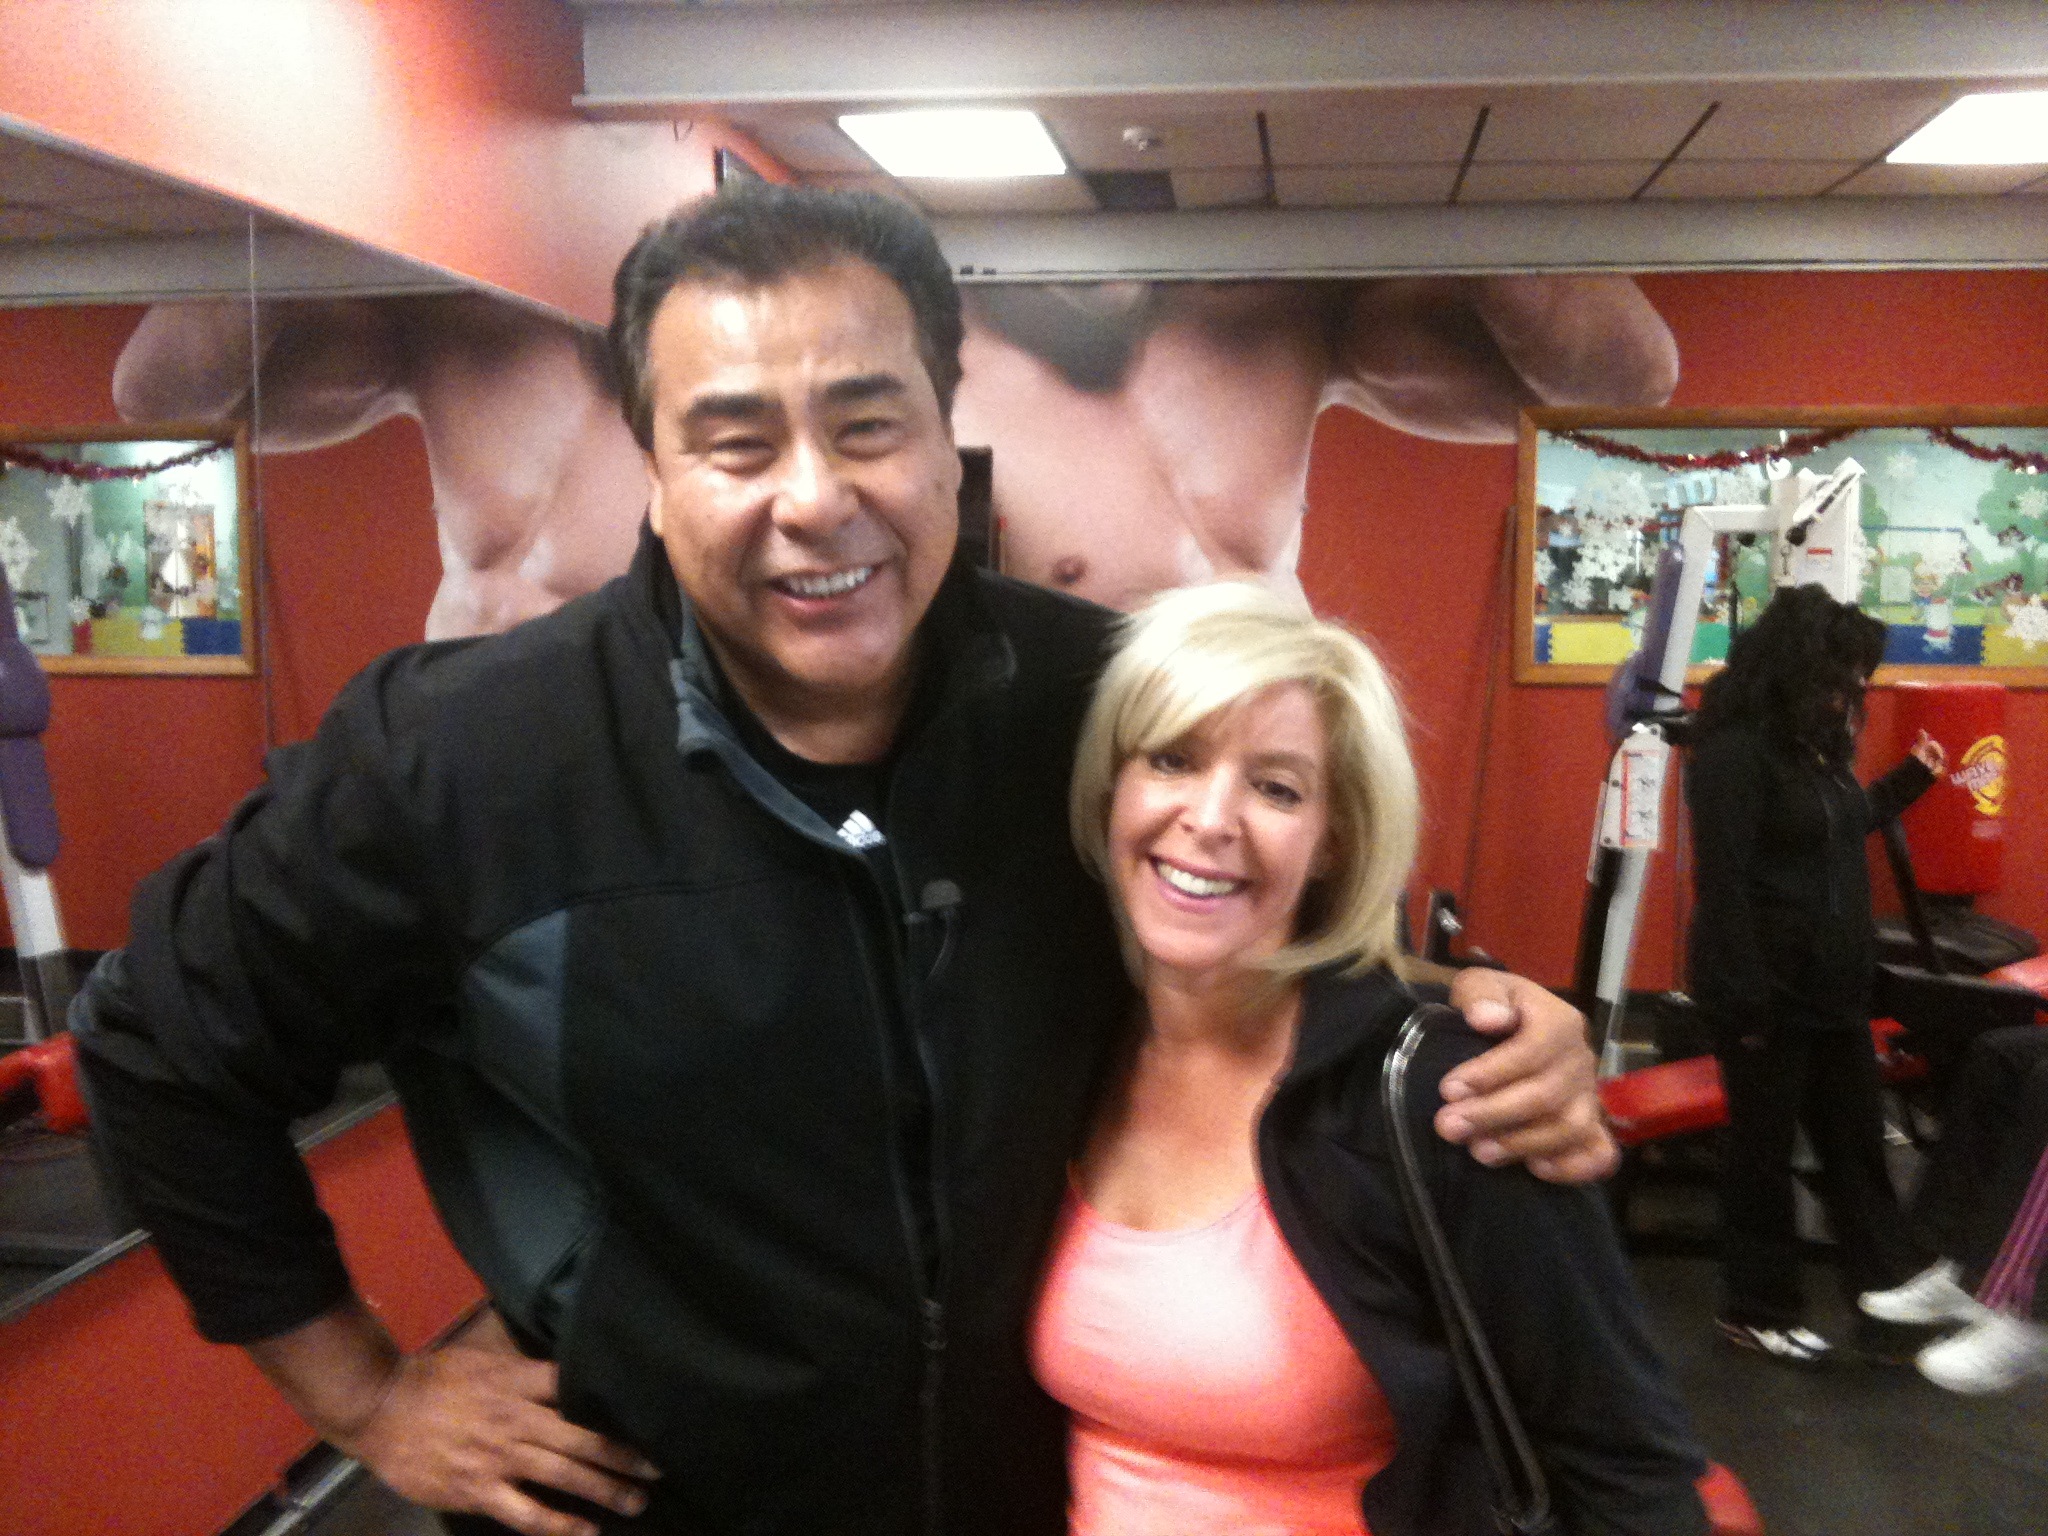 With John Quinones from ABC Primetime: What Would You Do? during the Gym Antiheroes episode